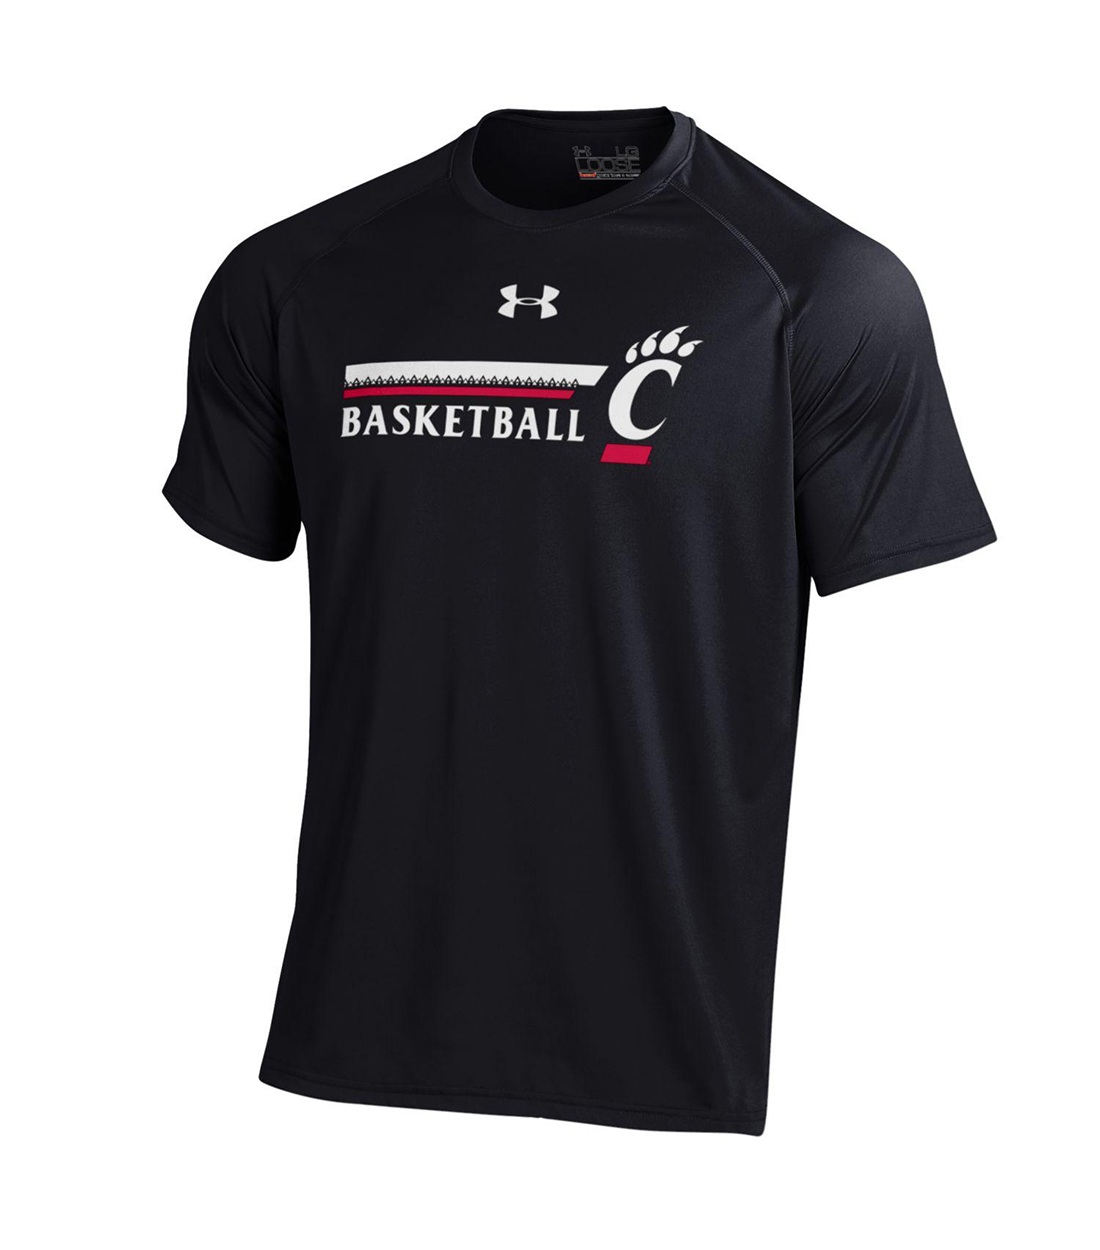 Under Armour Basketball Tee with Triangle Design | DuBois Book Store ...